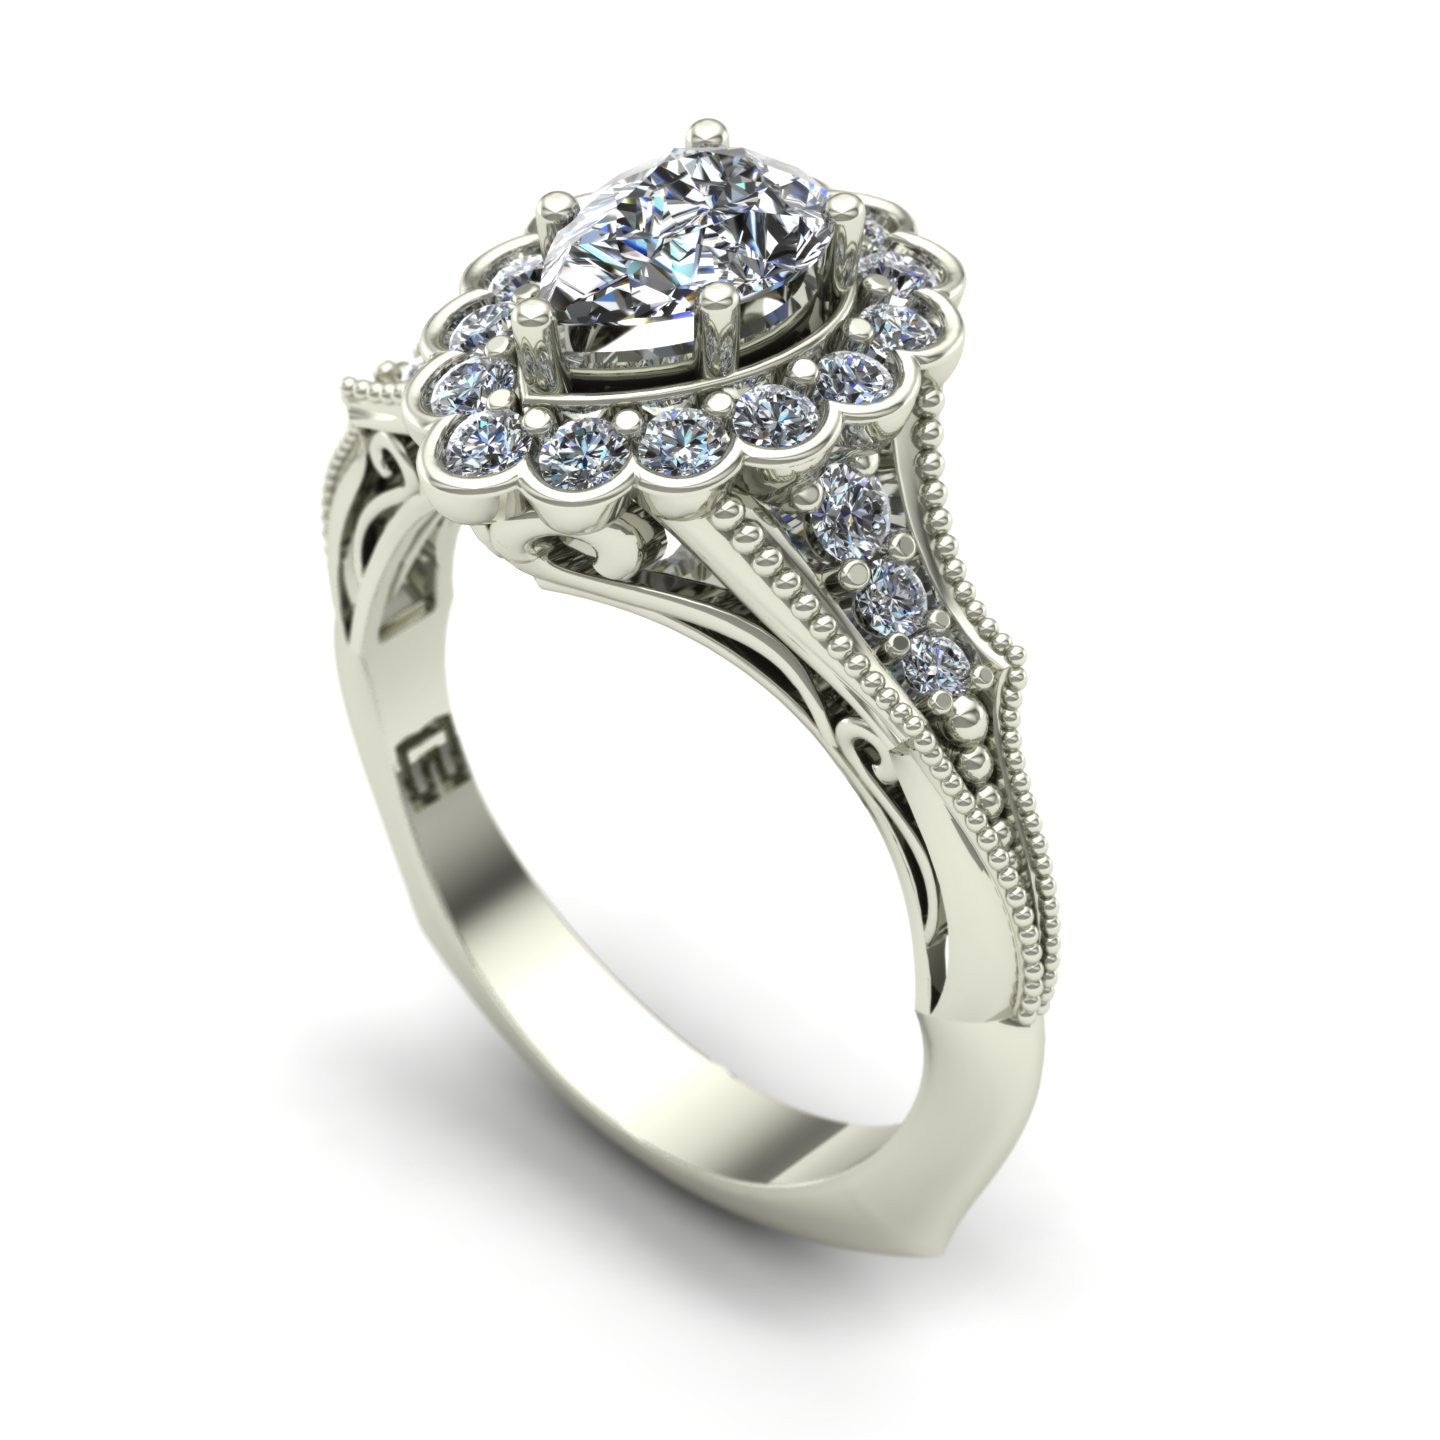 three quarter carat pear cut diamond engagement ring with scallop halo in 18k white gold - Charles Babb Designs